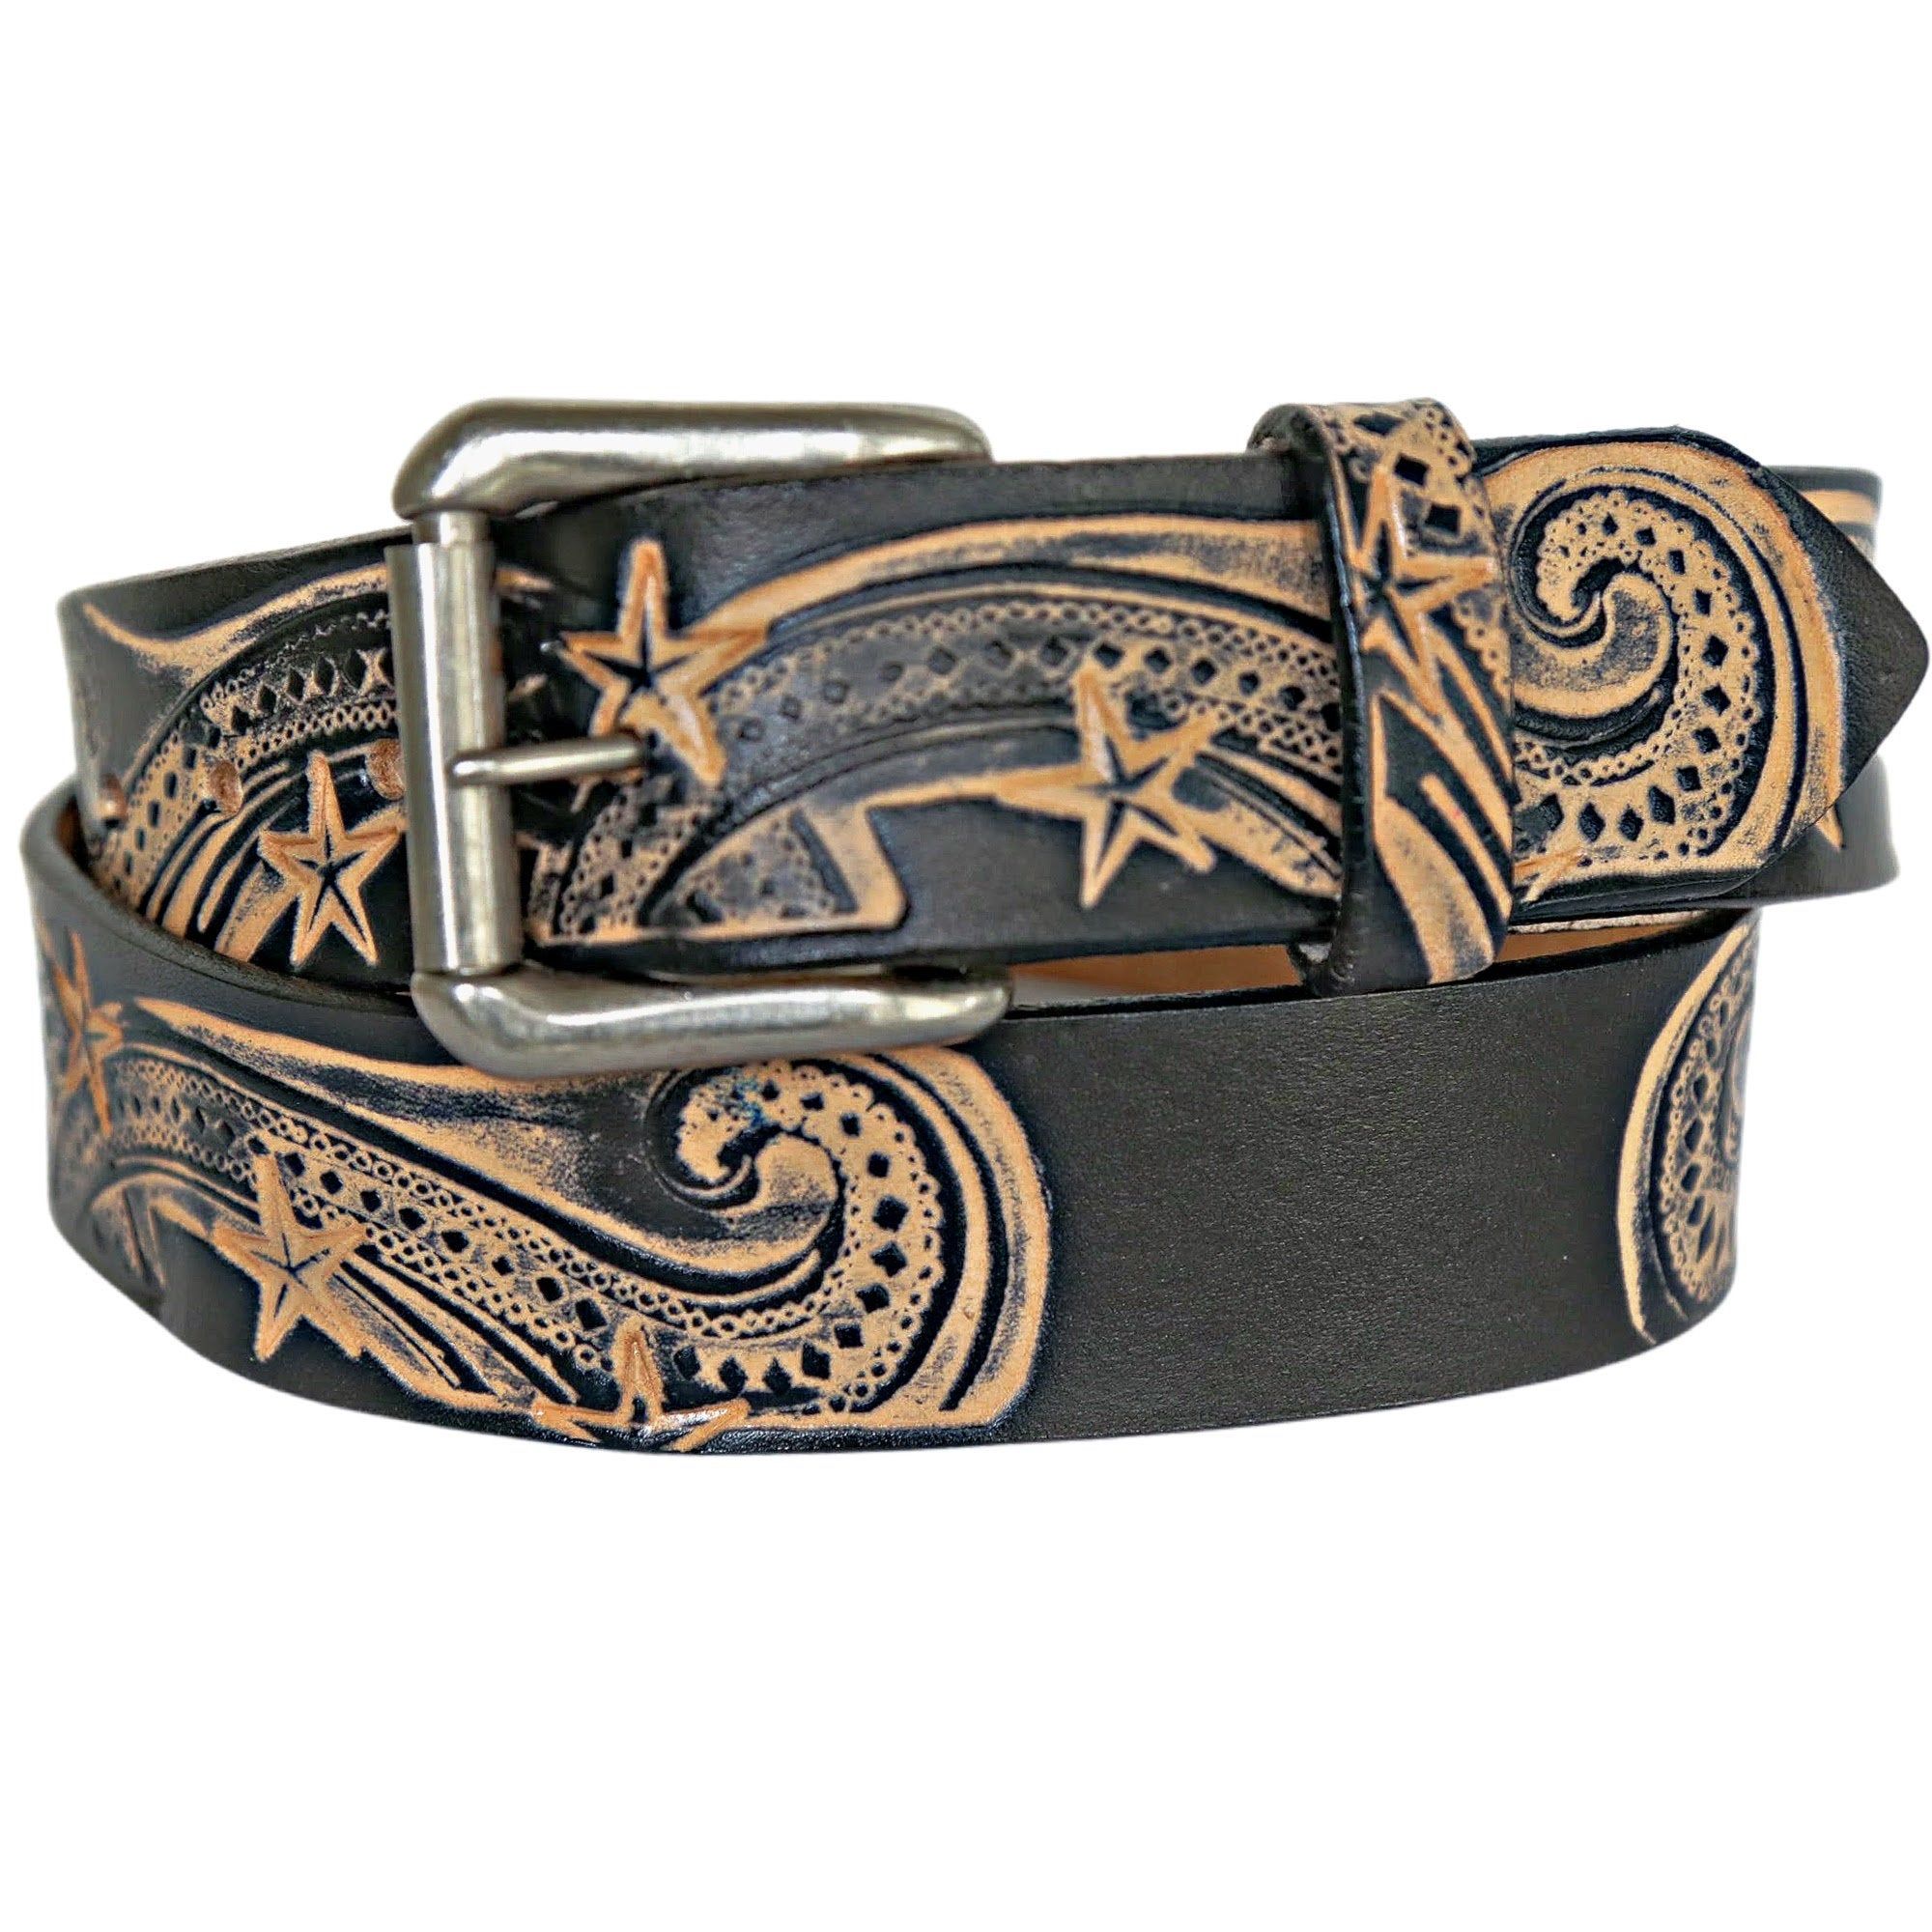 Belt Buckles: Adding Personalized Style to Your Accessories